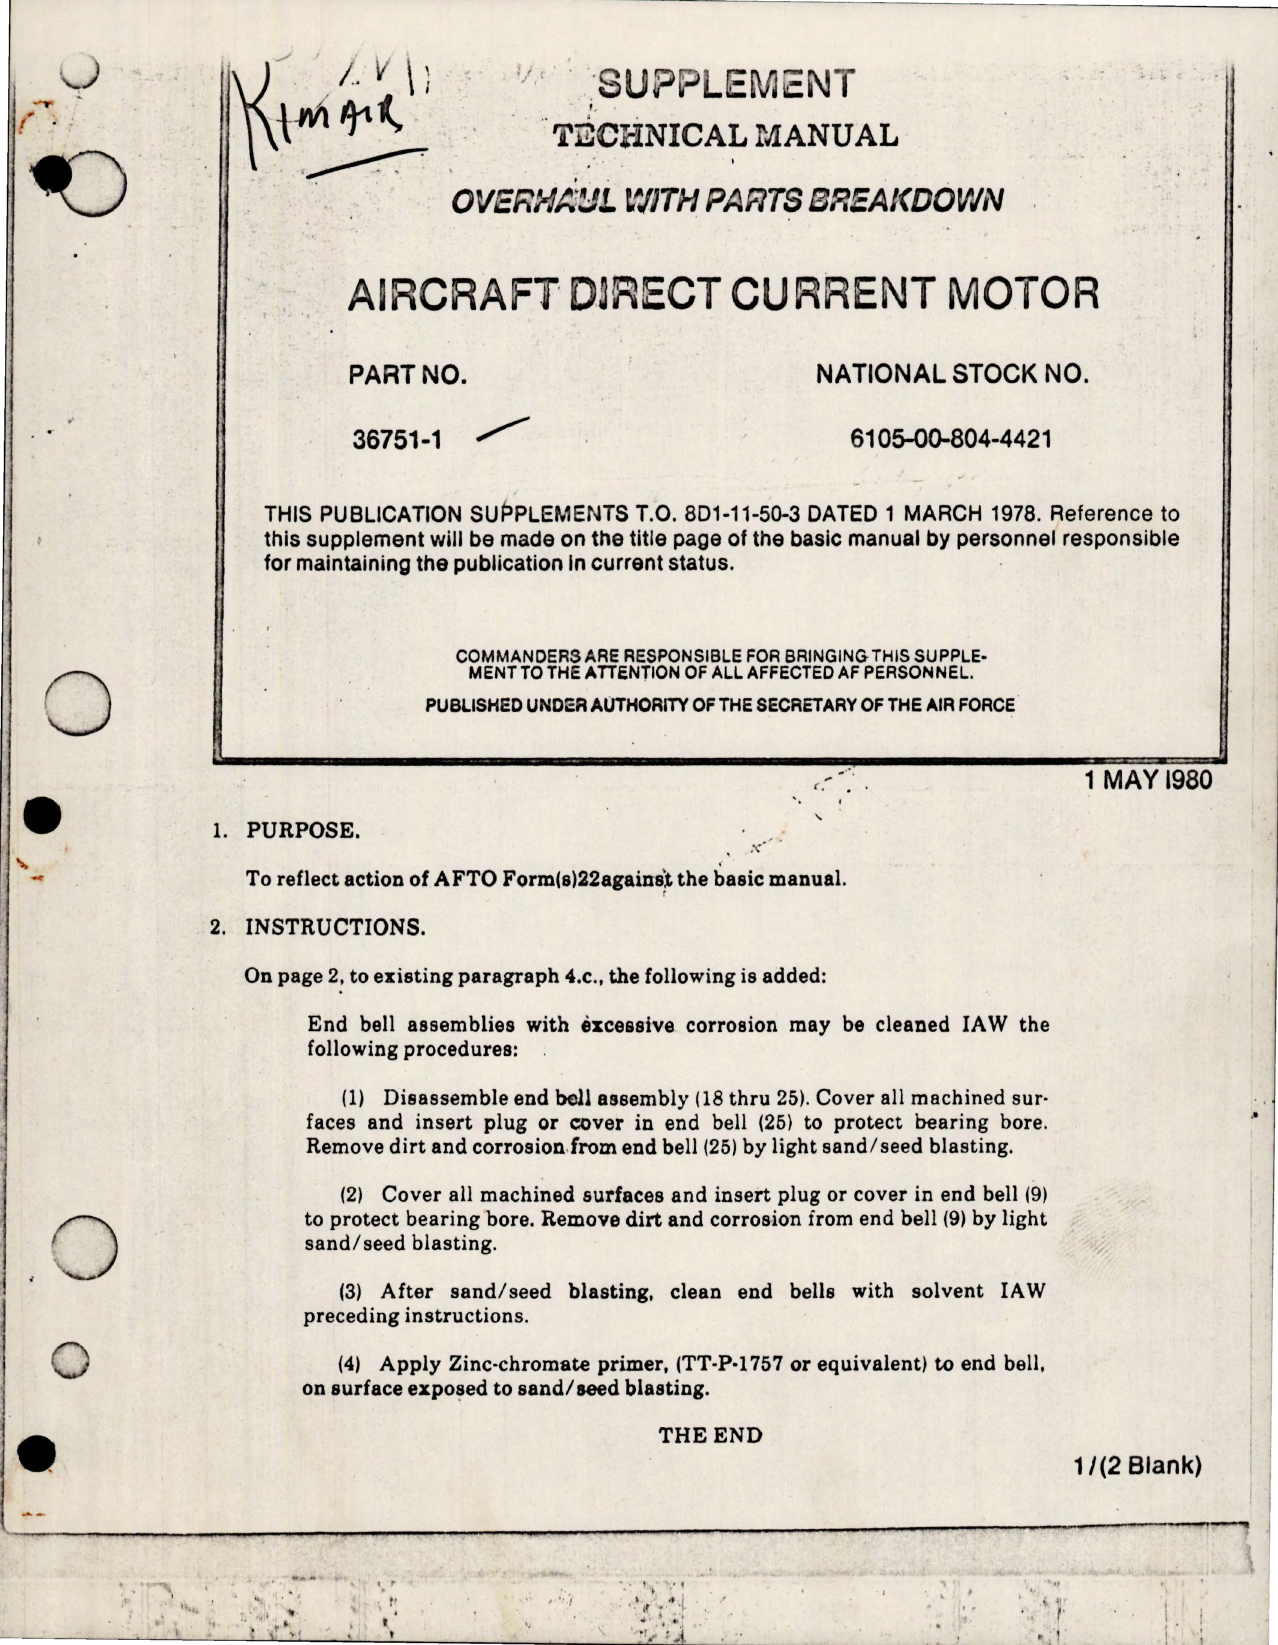 Sample page 1 from AirCorps Library document: Supplement to Overhaul with Parts Breakdown for Aircraft Direct Current Motor - Part 36751-1